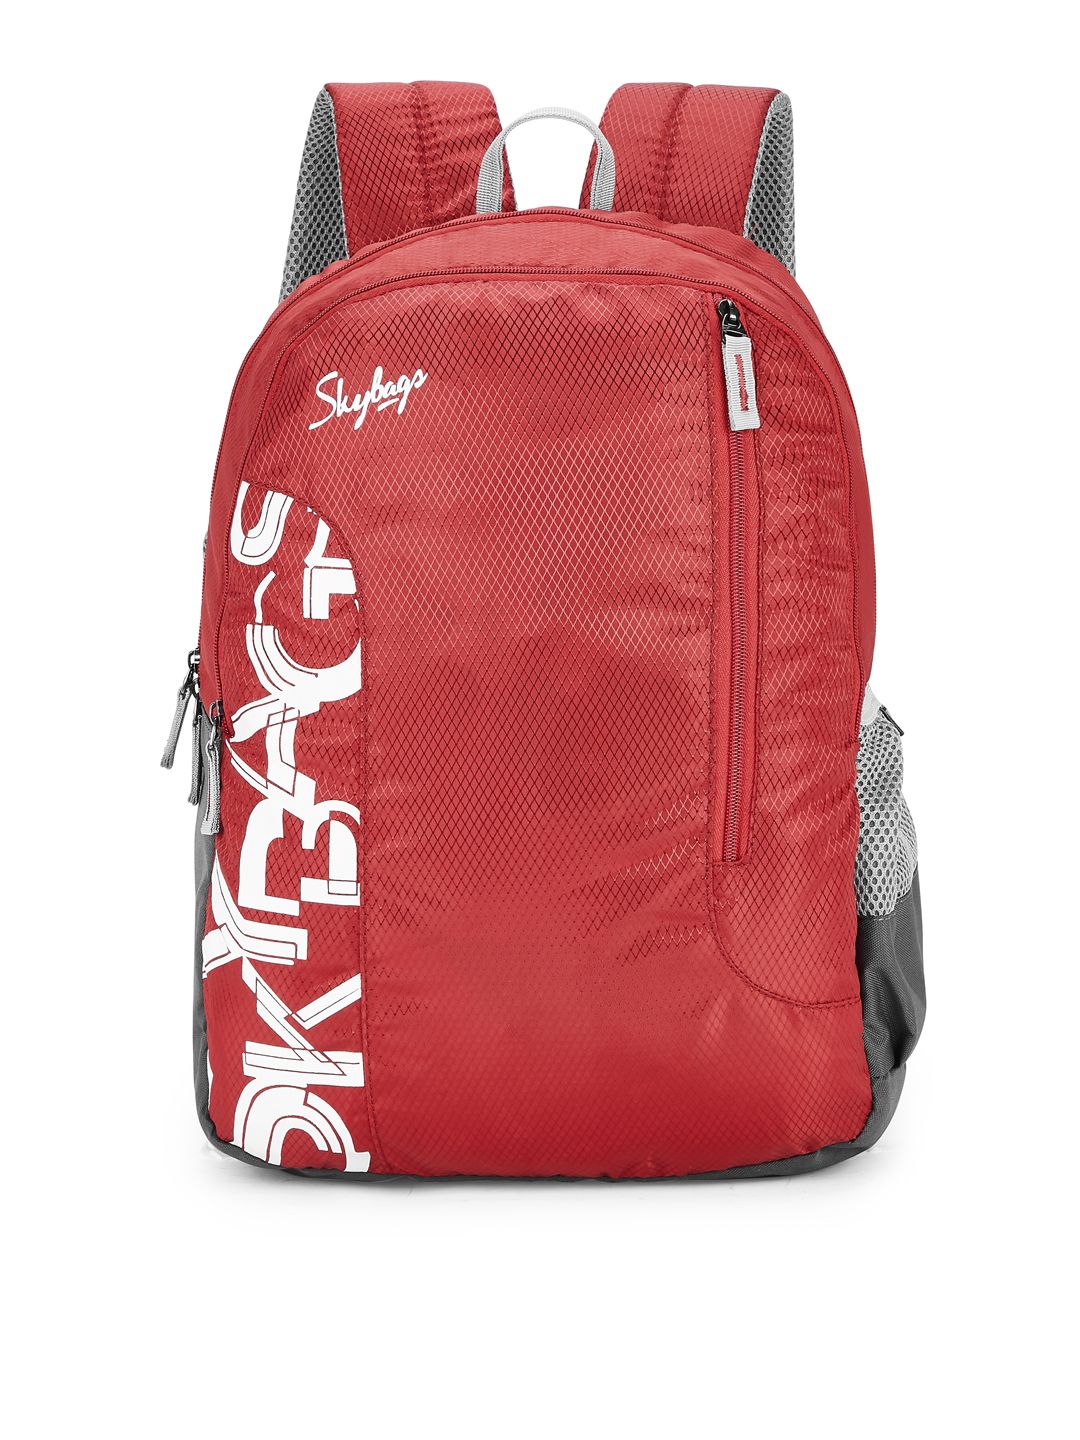 Skybags Unisex Red BRAT Brand Logo Backpack Price in India